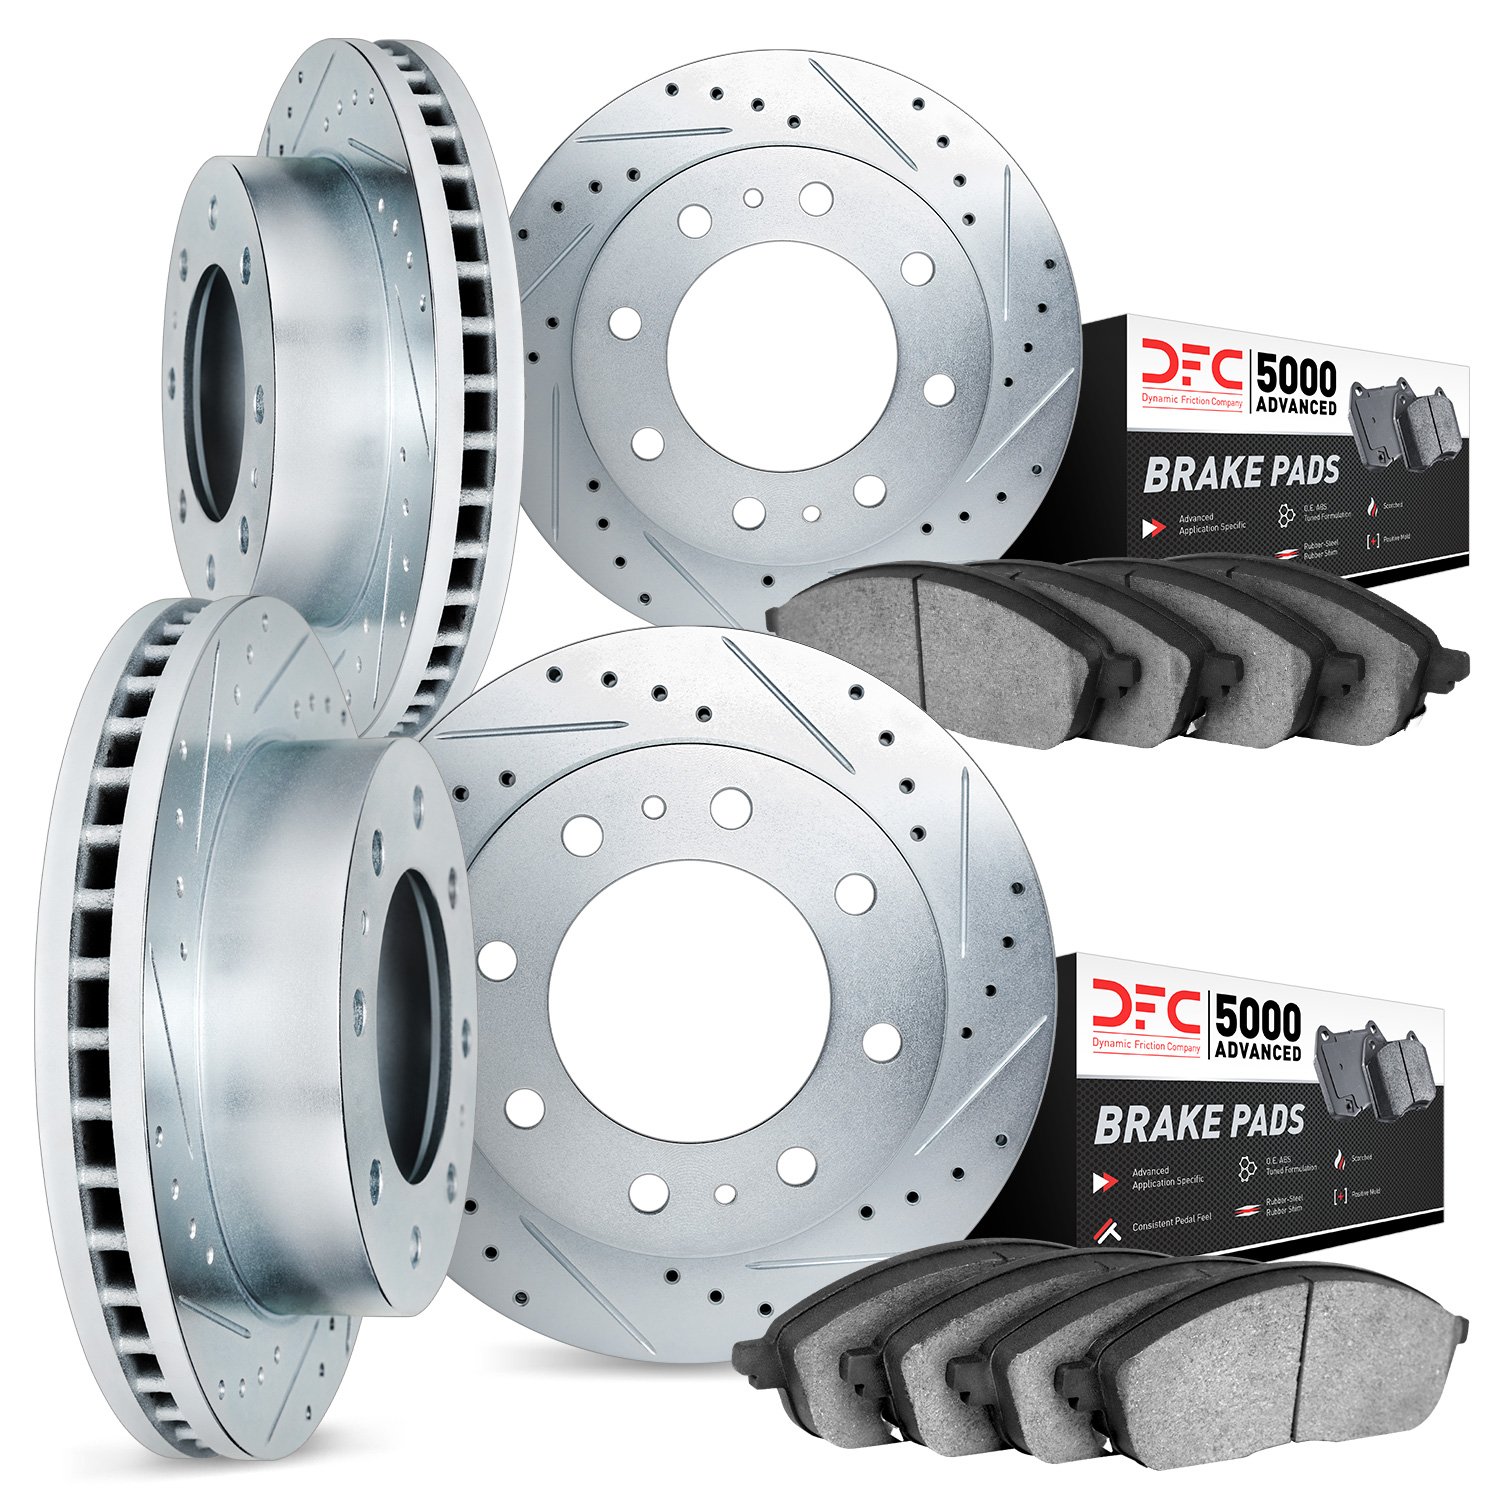 7504-54328 Drilled/Slotted Brake Rotors w/5000 Advanced Brake Pads Kit [Silver], 1999-1999 Ford/Lincoln/Mercury/Mazda, Position: